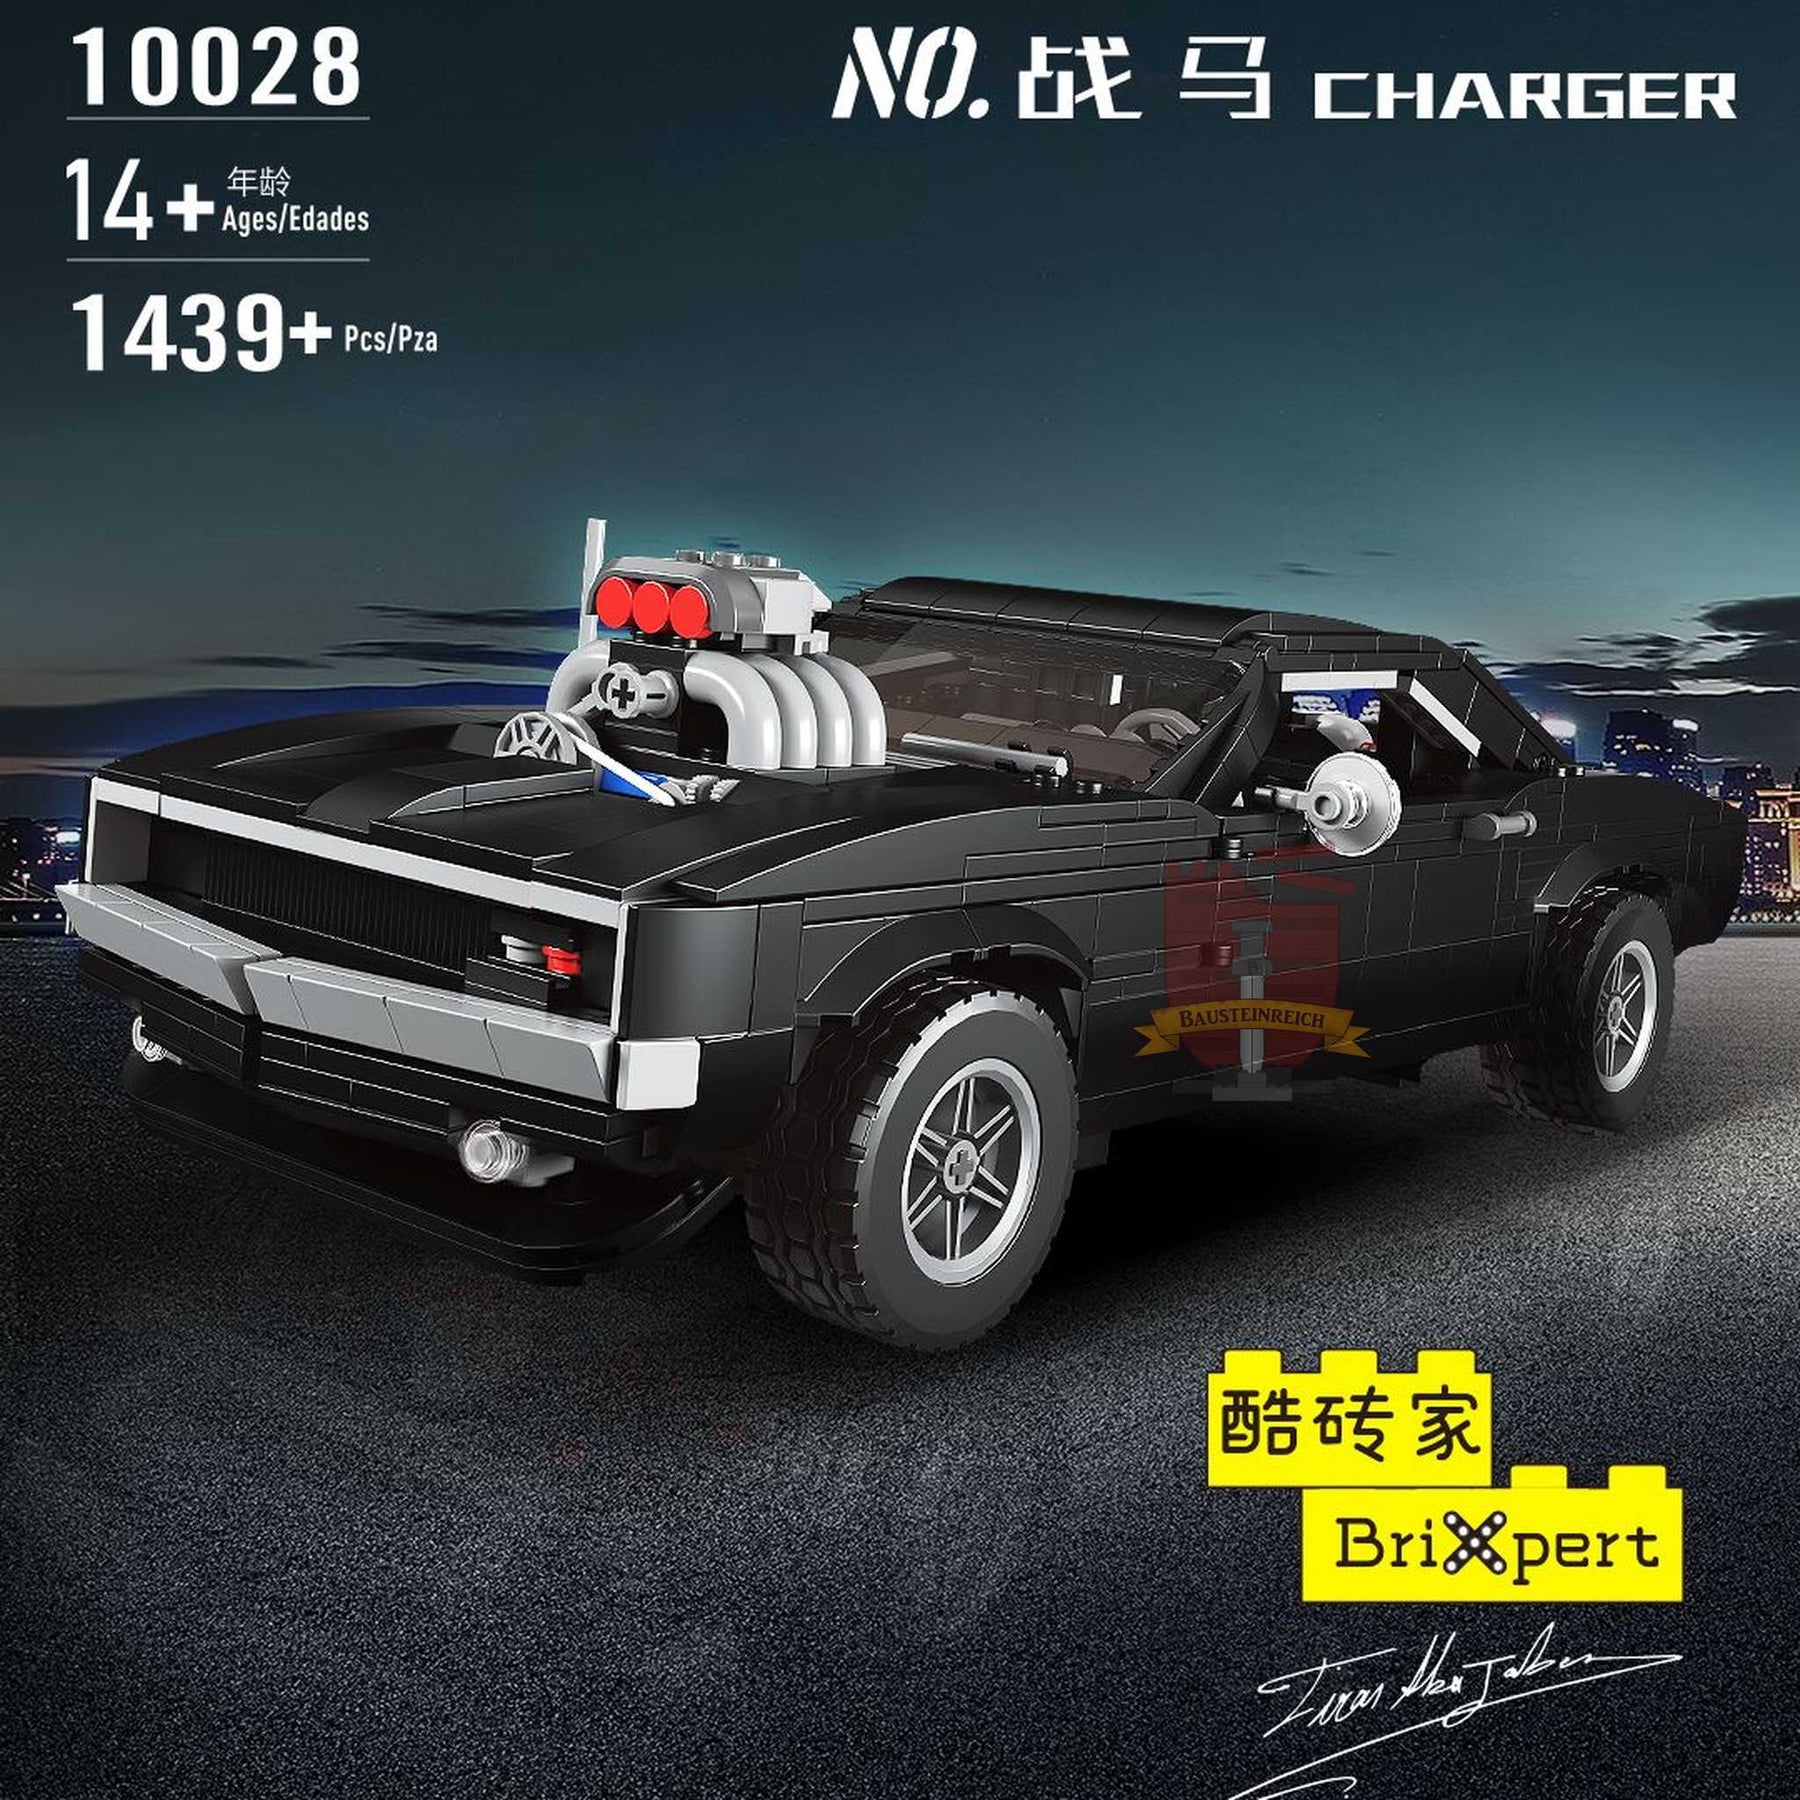 10028 - Charger (Mould King)